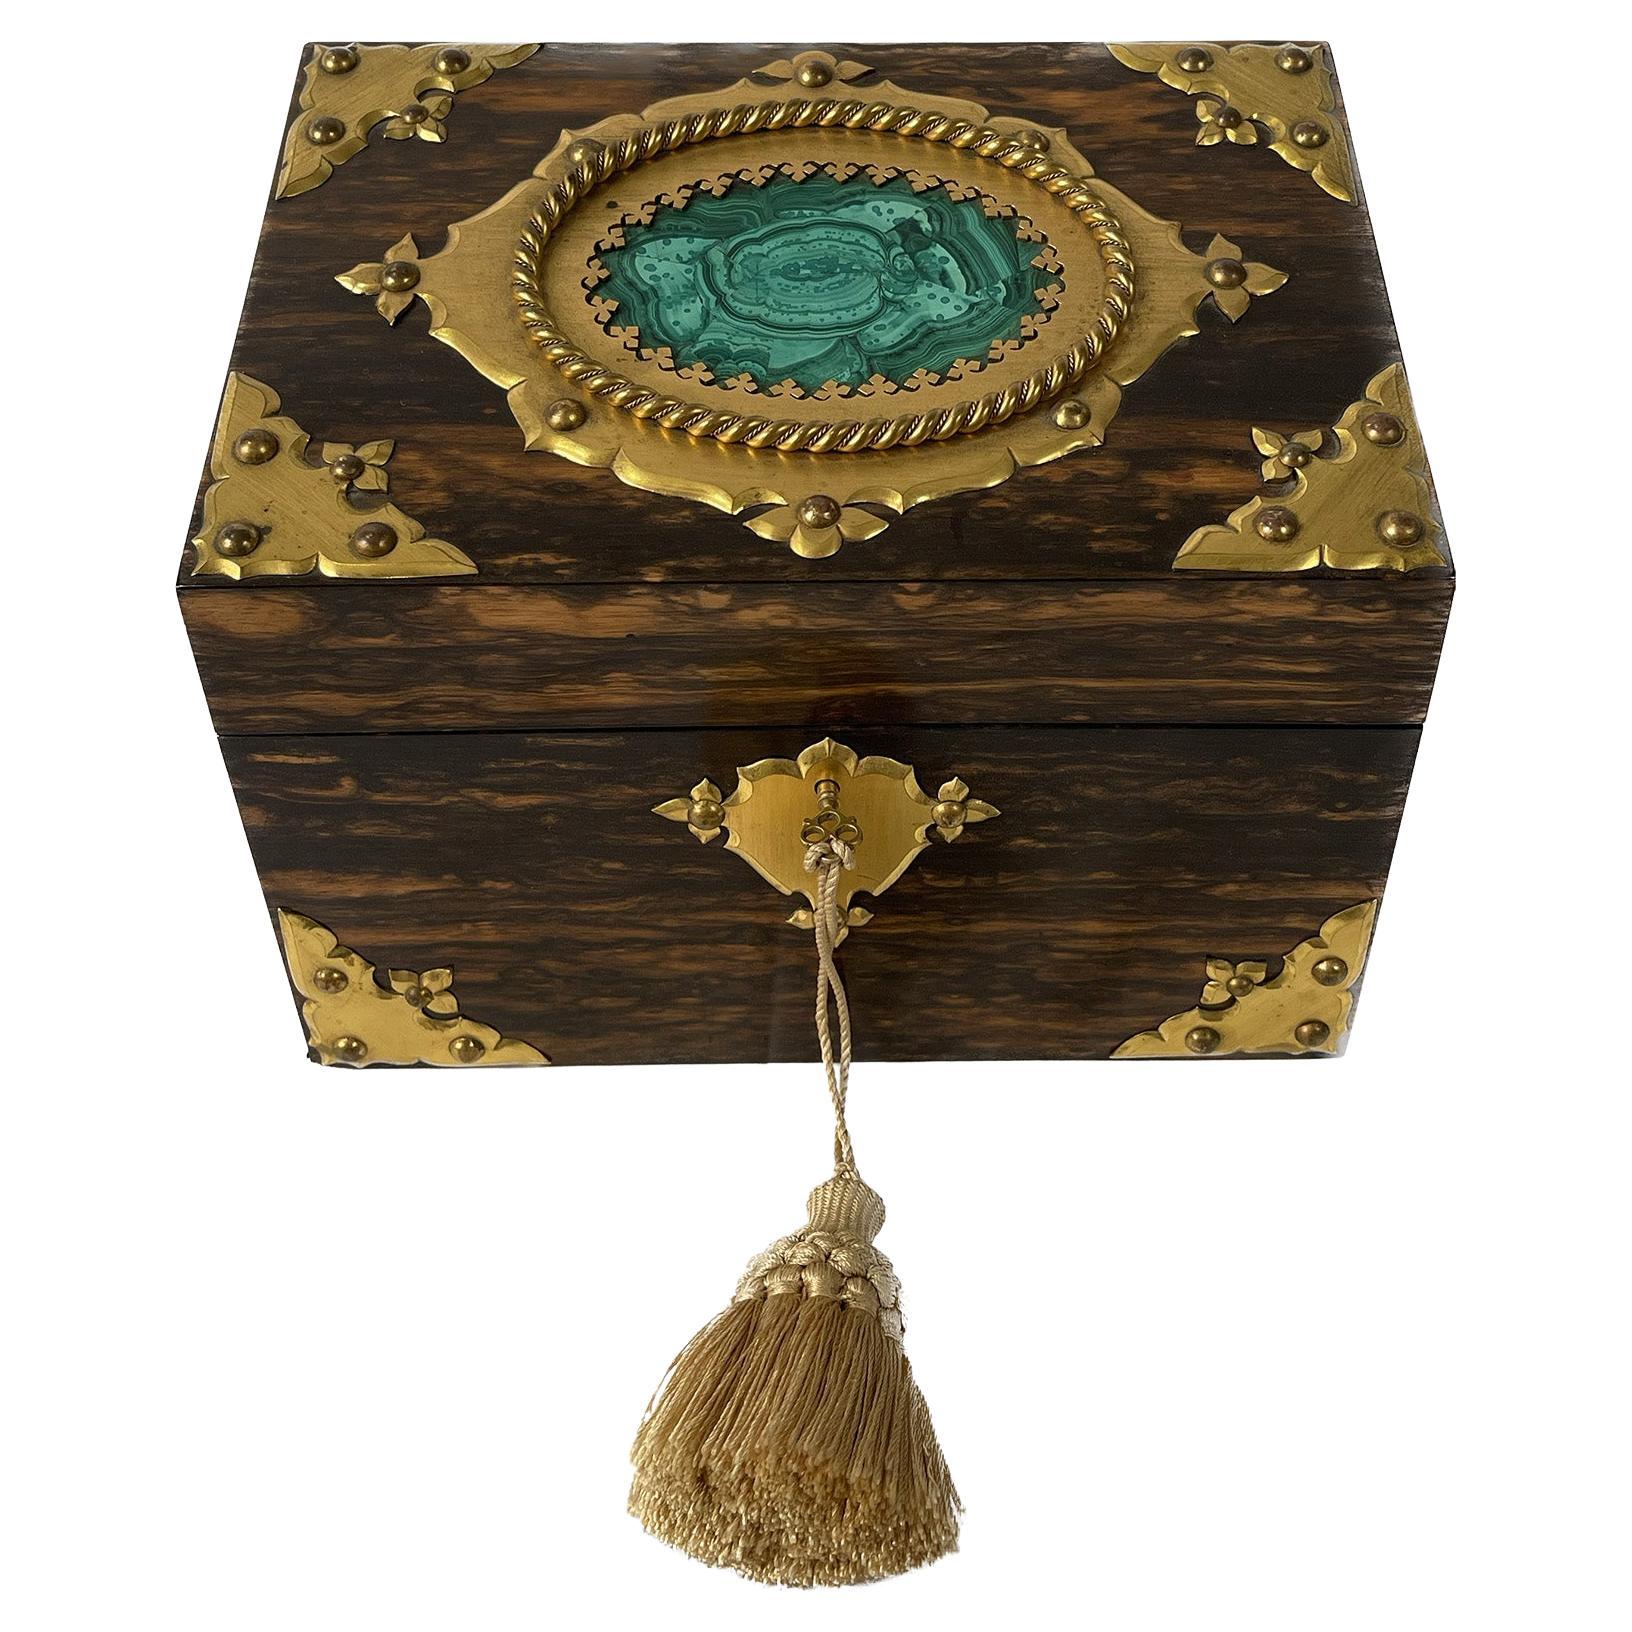 English Calamander Filing Box with Malachite and Brass Fittings For Sale